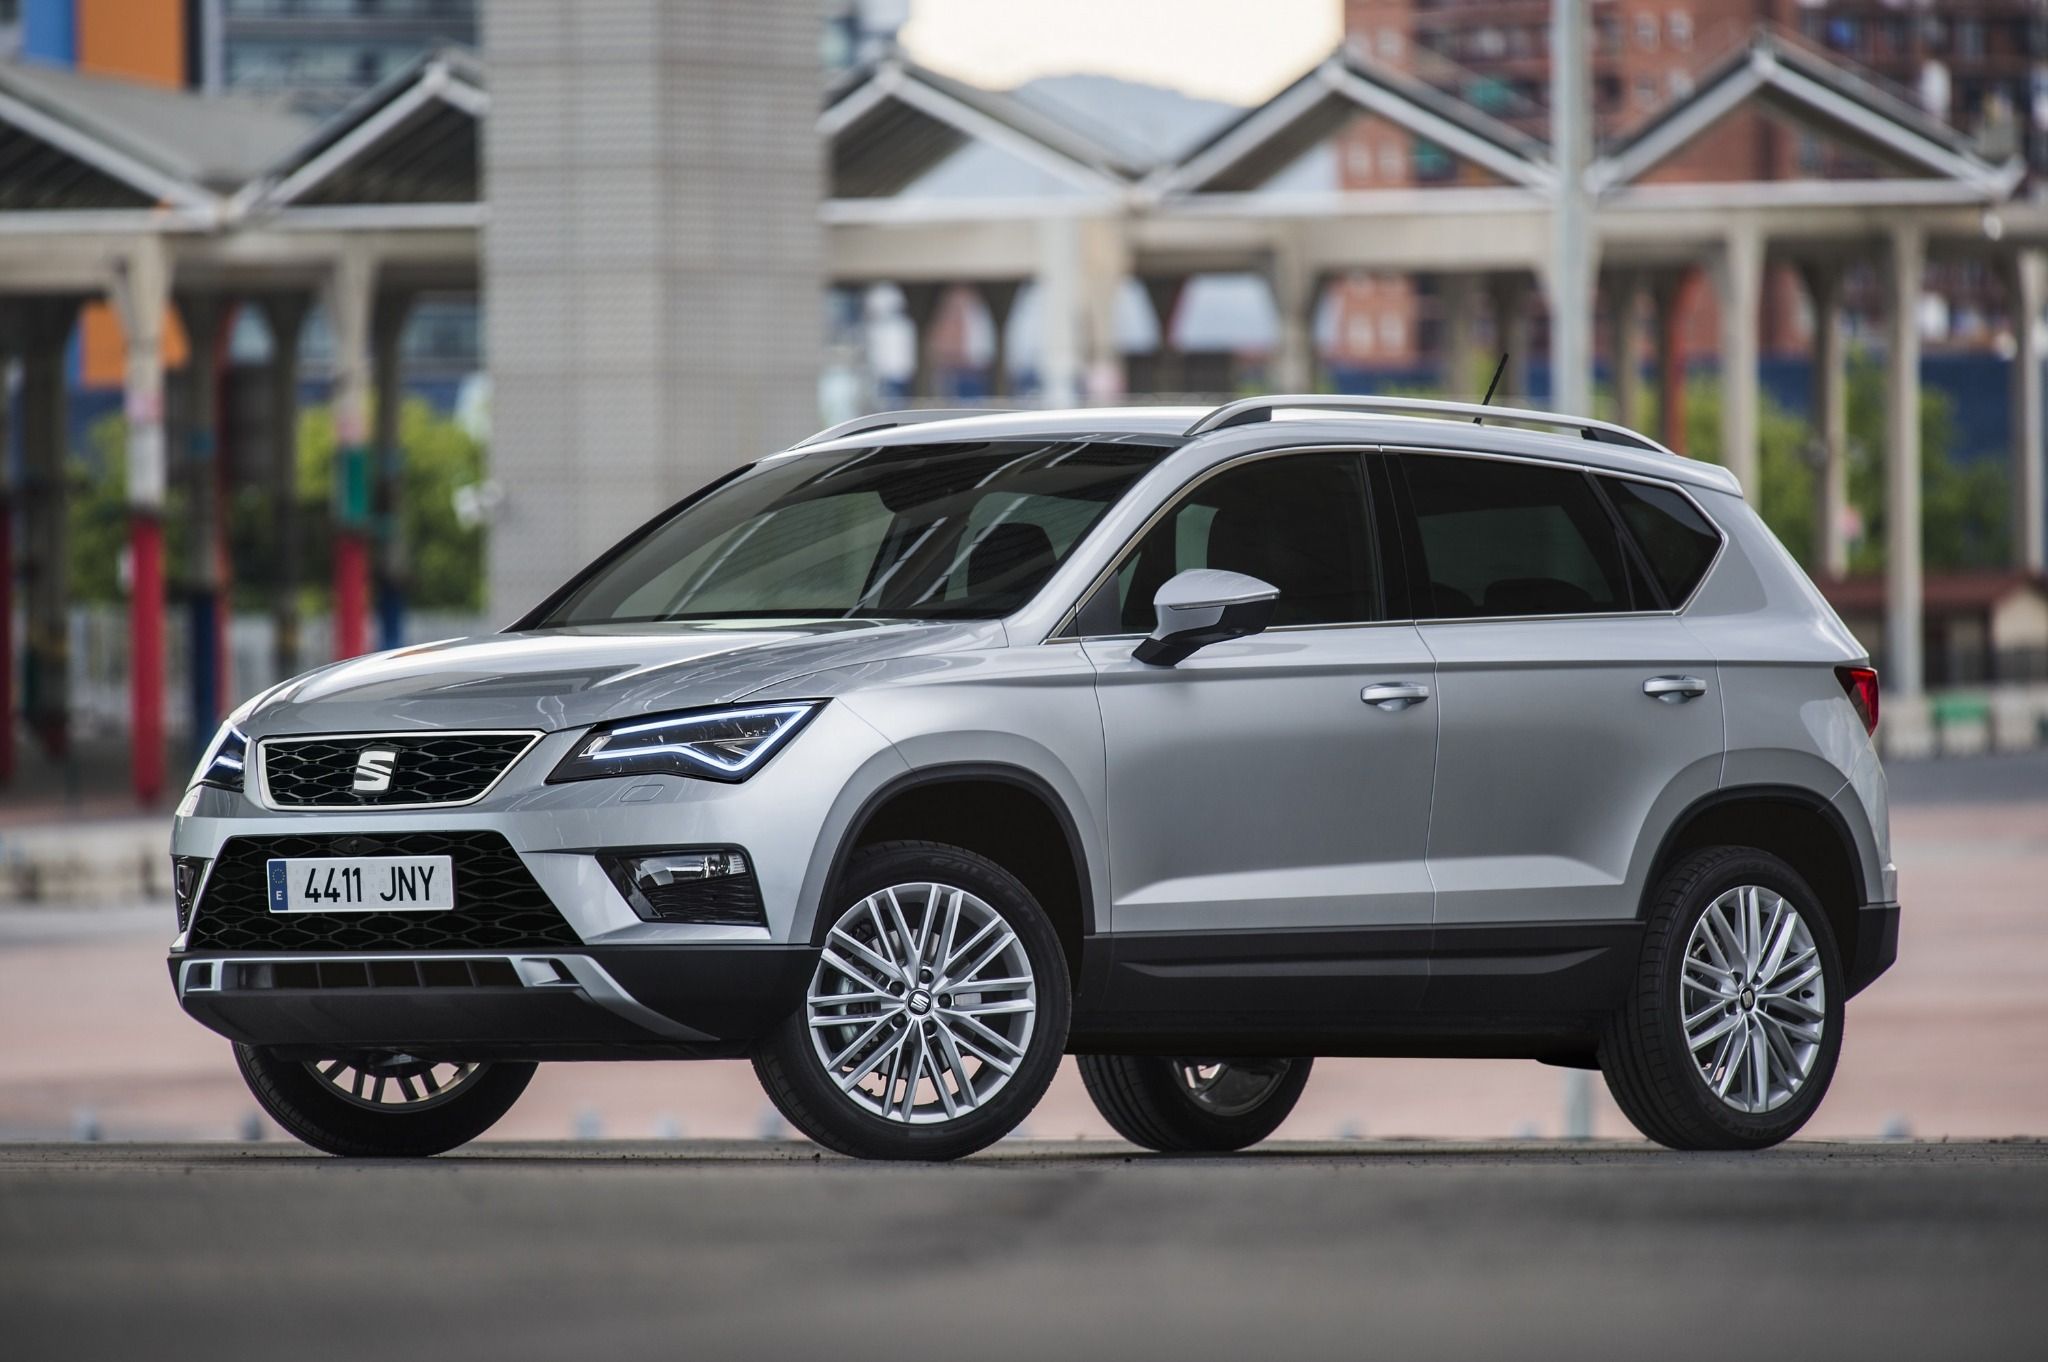 Silver SEAT Ateca exterior front parked